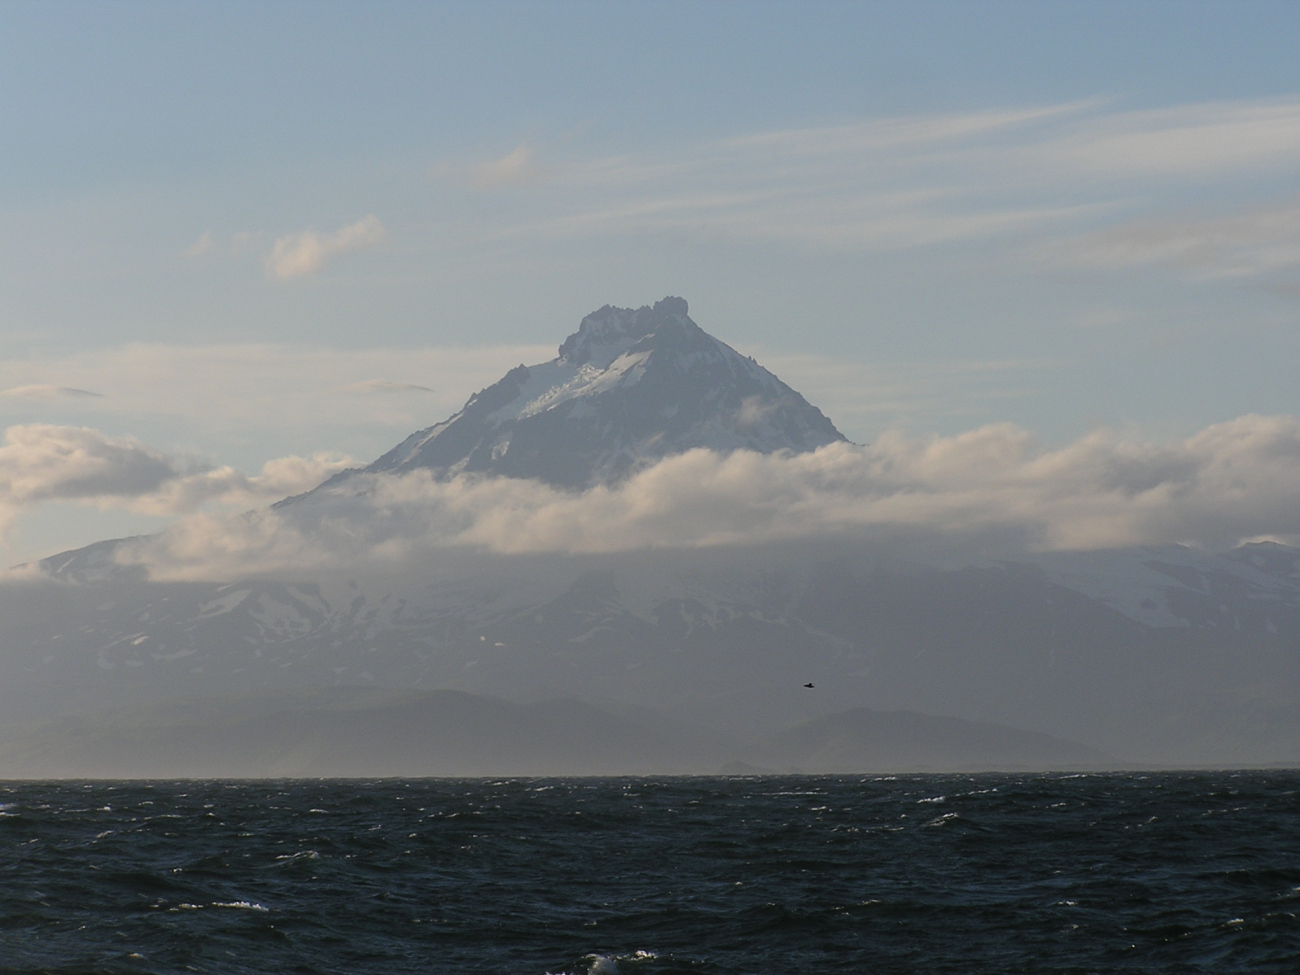 Isanotski Volcano, also known as Raggedy Jack seen on a misty day